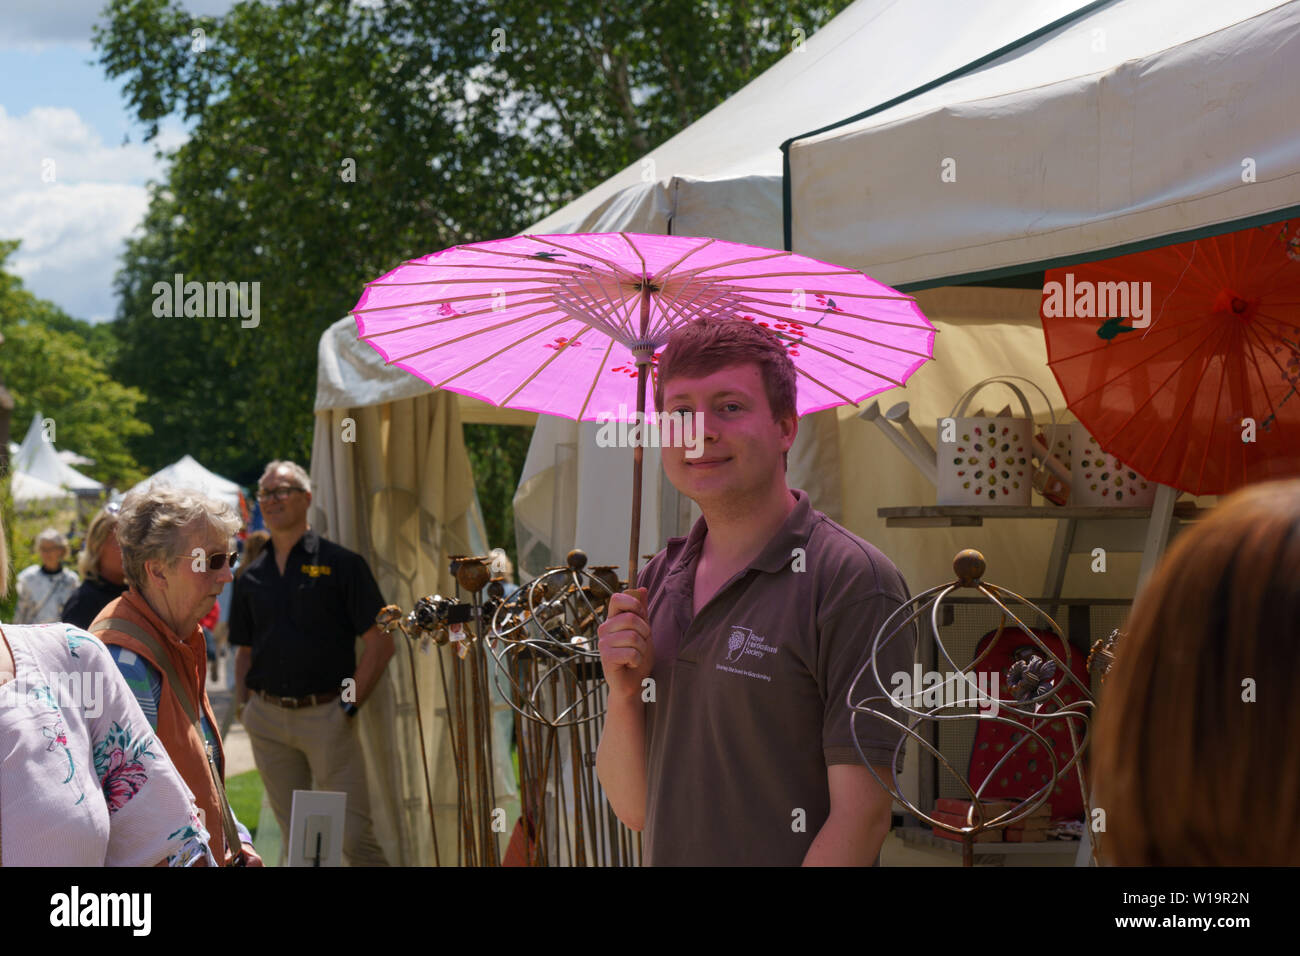 Guy stood by a trade tent and taking shade under a pink Umbrella at a flower show, Harrogate, North Yorkshire, England, UK. Stock Photo